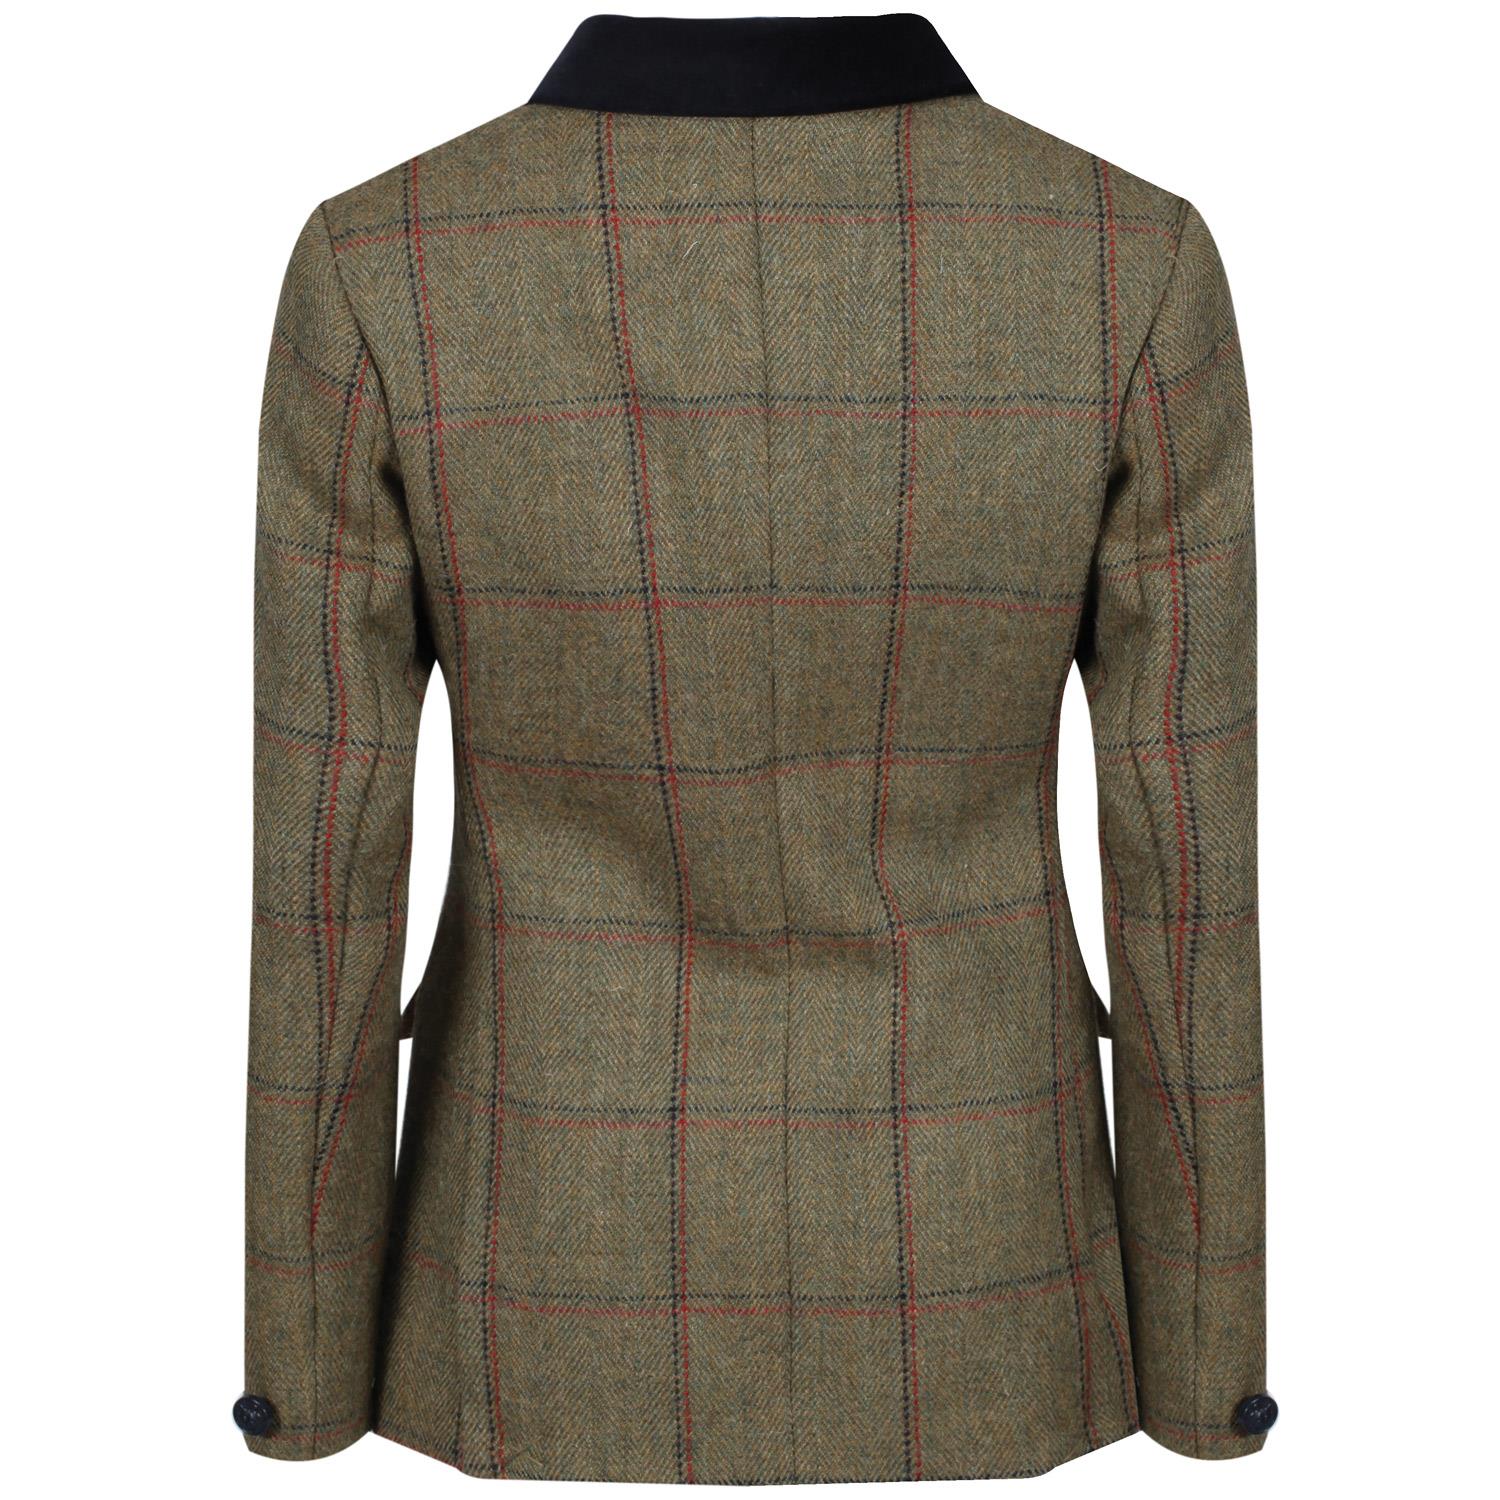 Equetech Maids Launton Deluxe Tweed Riding Jacket - Just Horse Riders